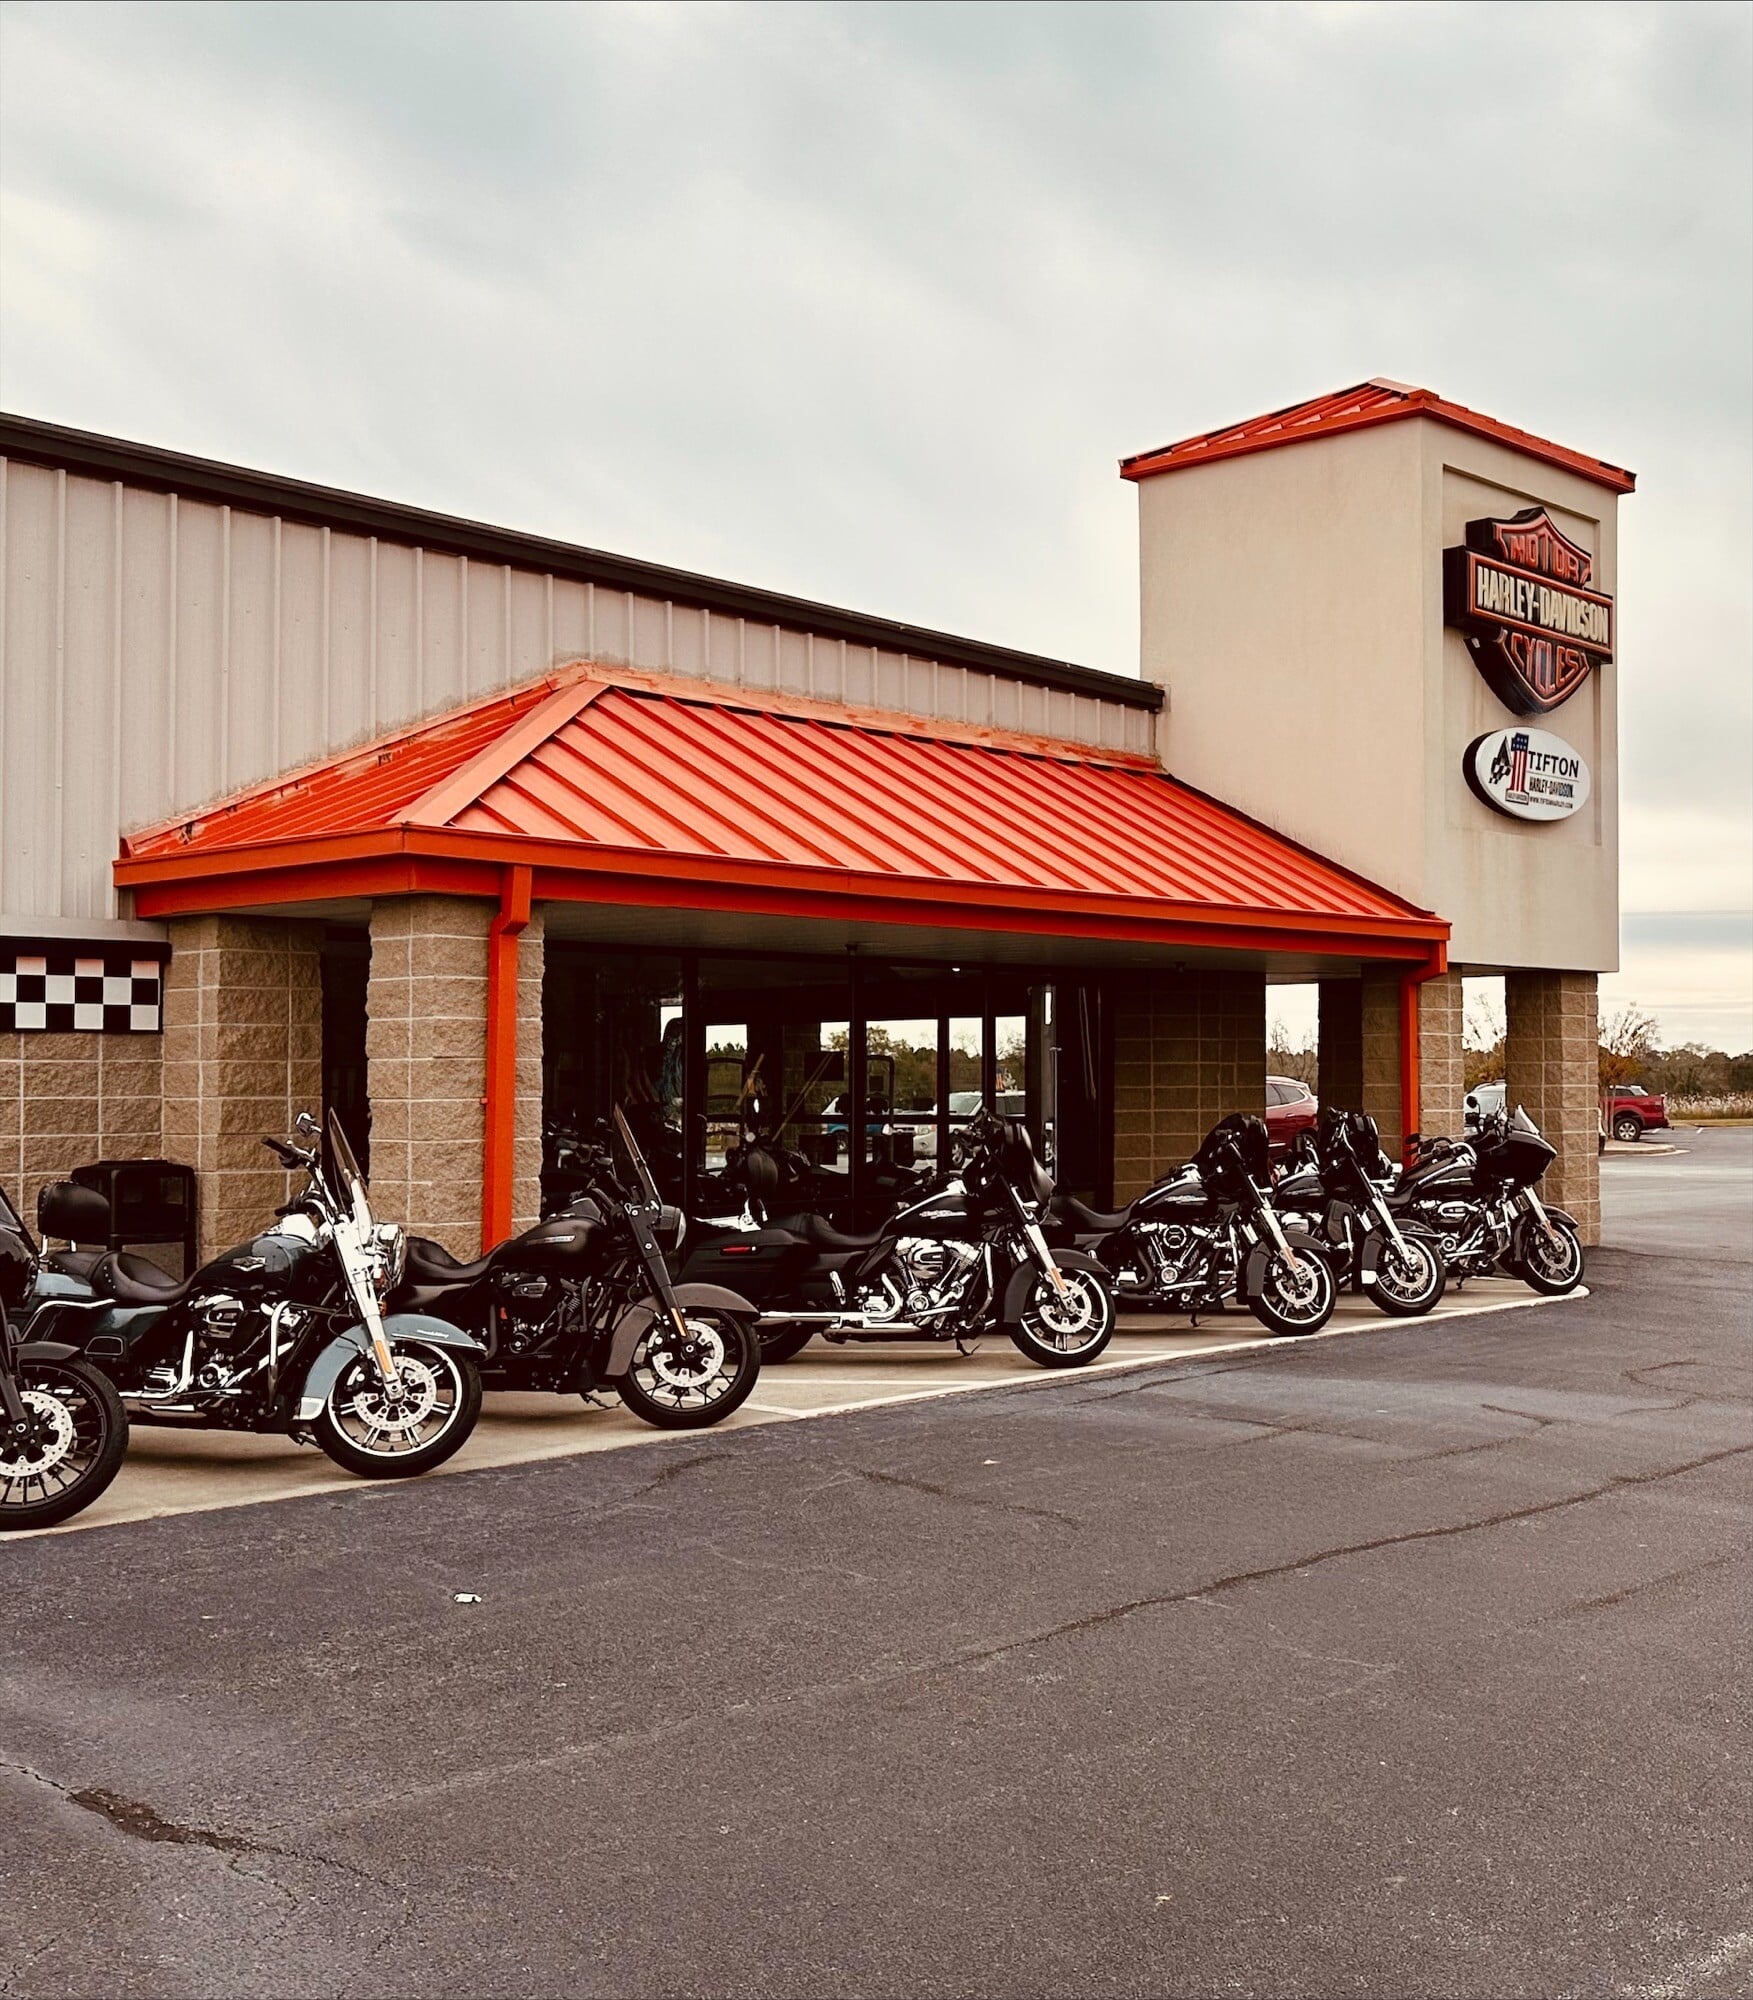 Join the Law Tigers and Tifton Harley-Davidson® as they honor our nation’s veterans and first responders at the Harley’s Heroes Appreciation Lunch on Saturday, Nov. 11.